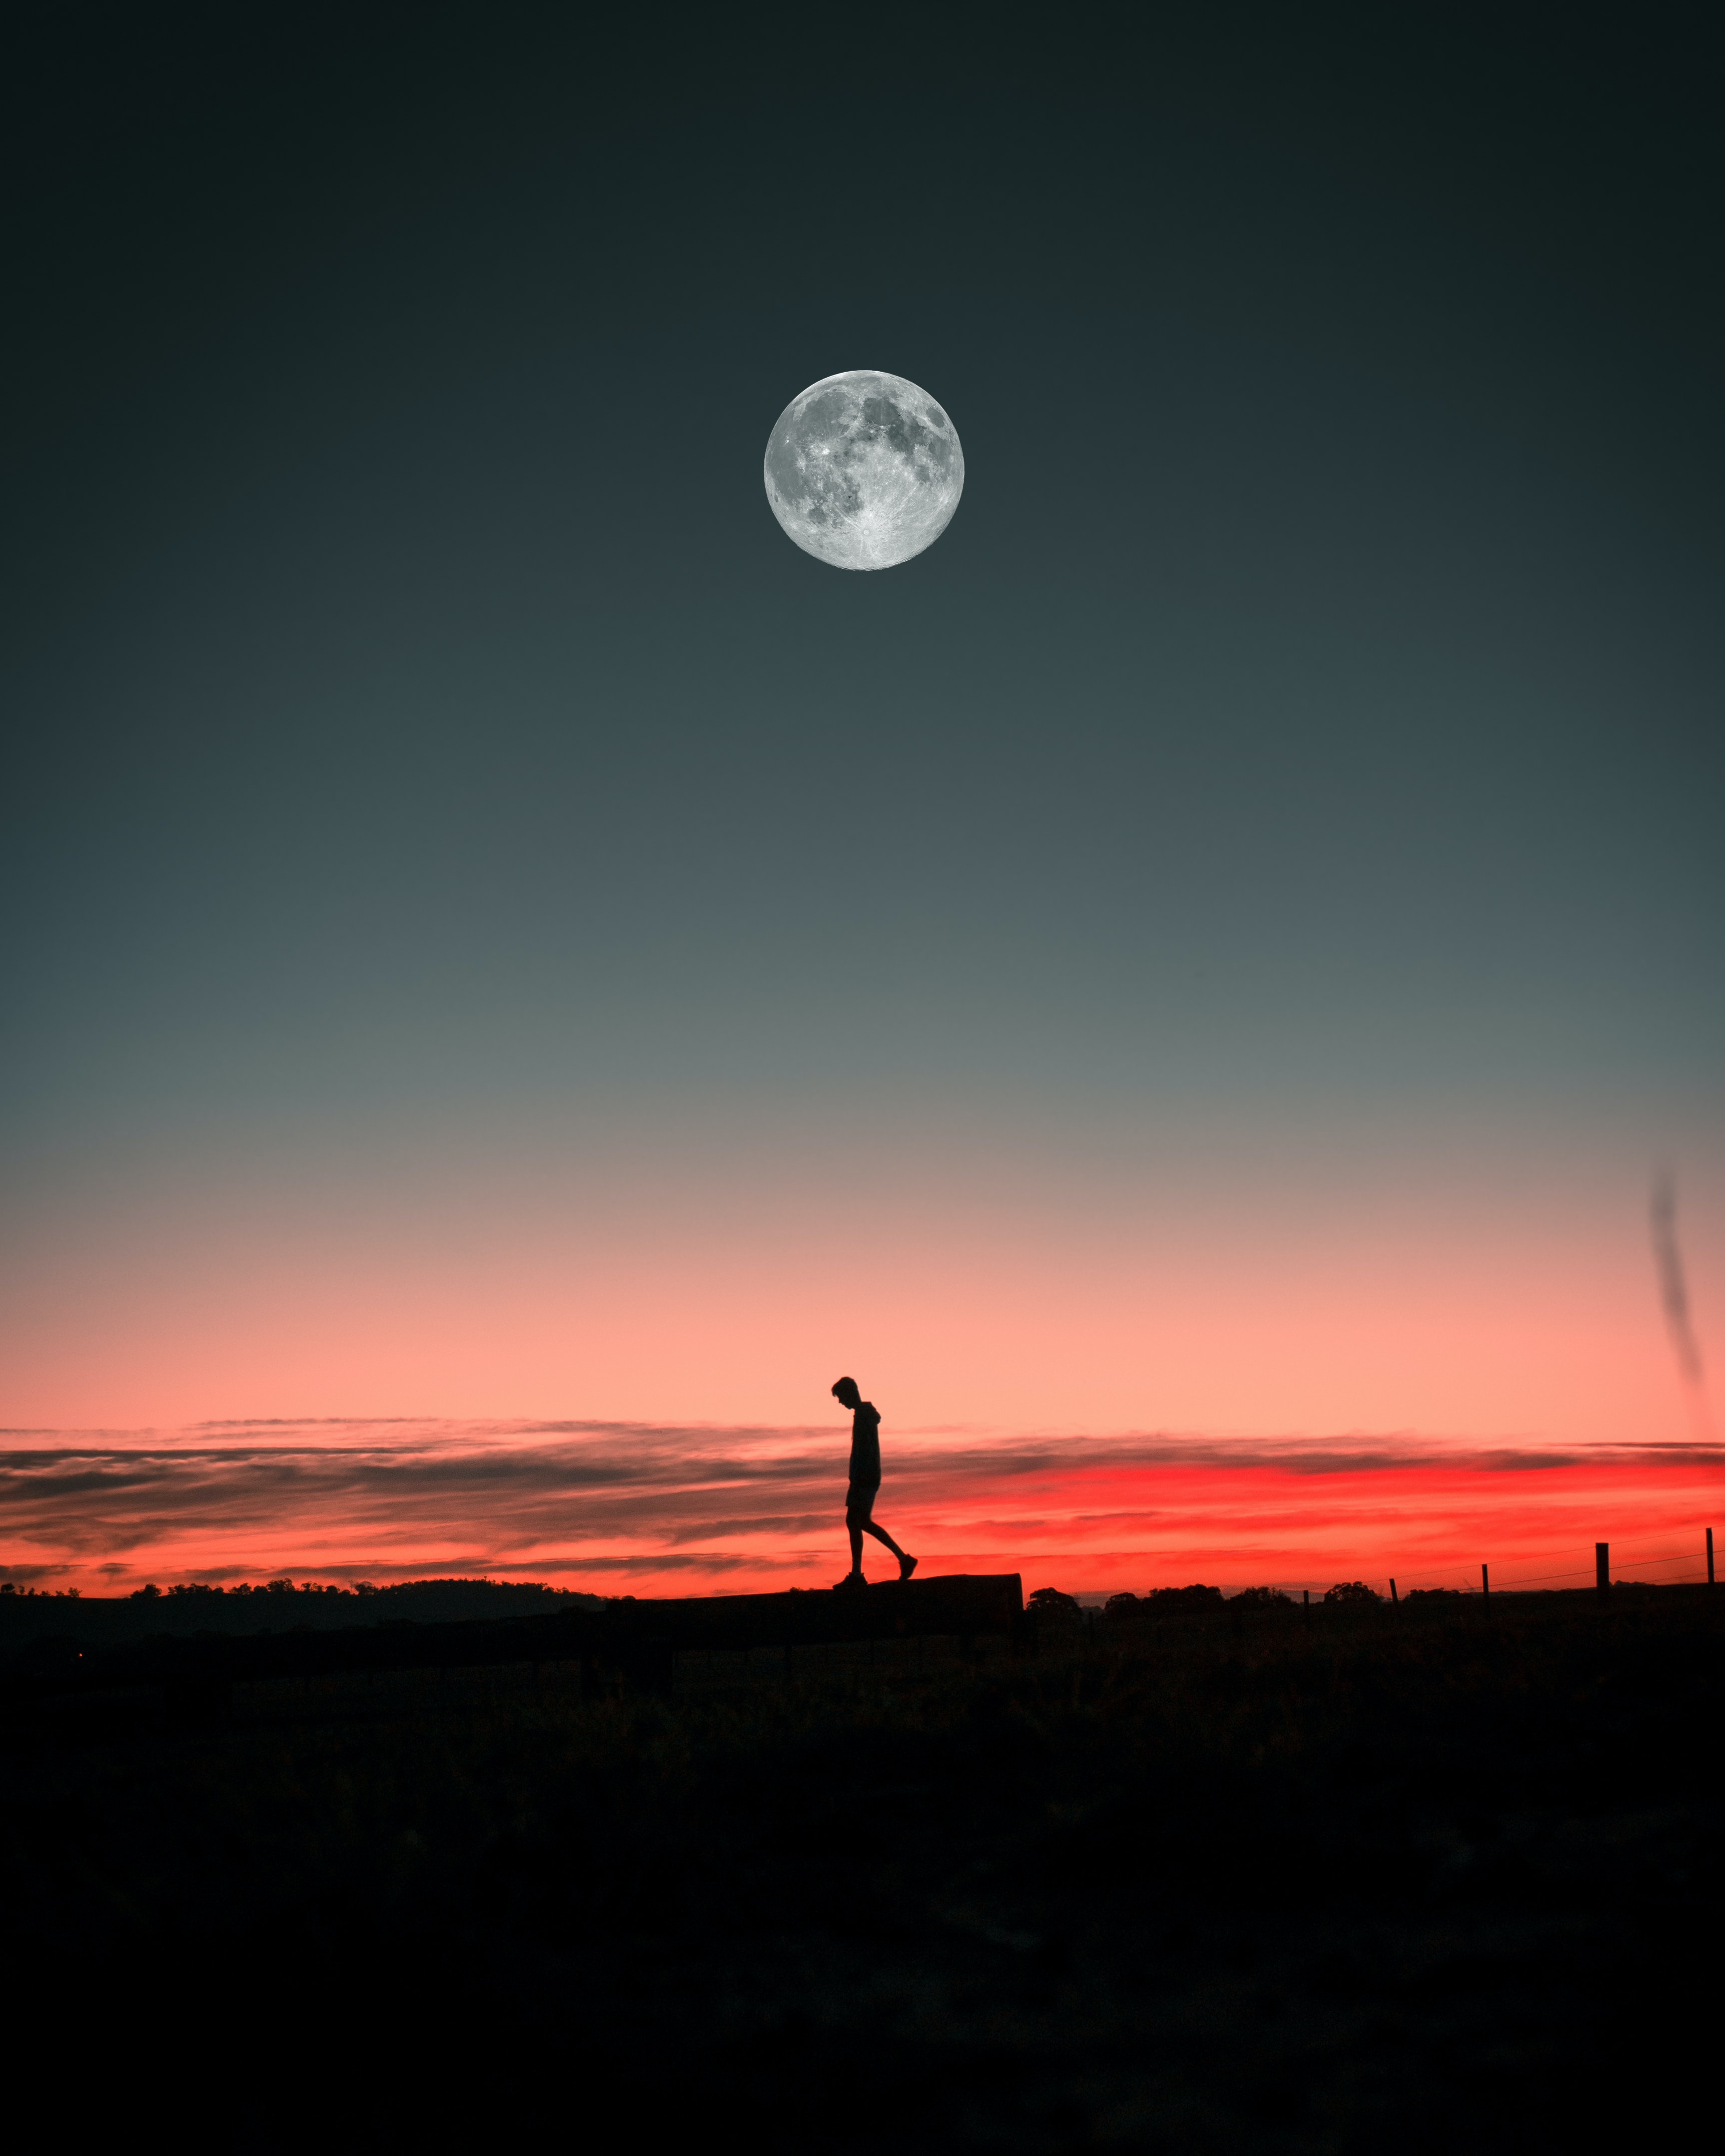 alone, moon, lonely, loneliness, silhouette, sunset, miscellanea, miscellaneous